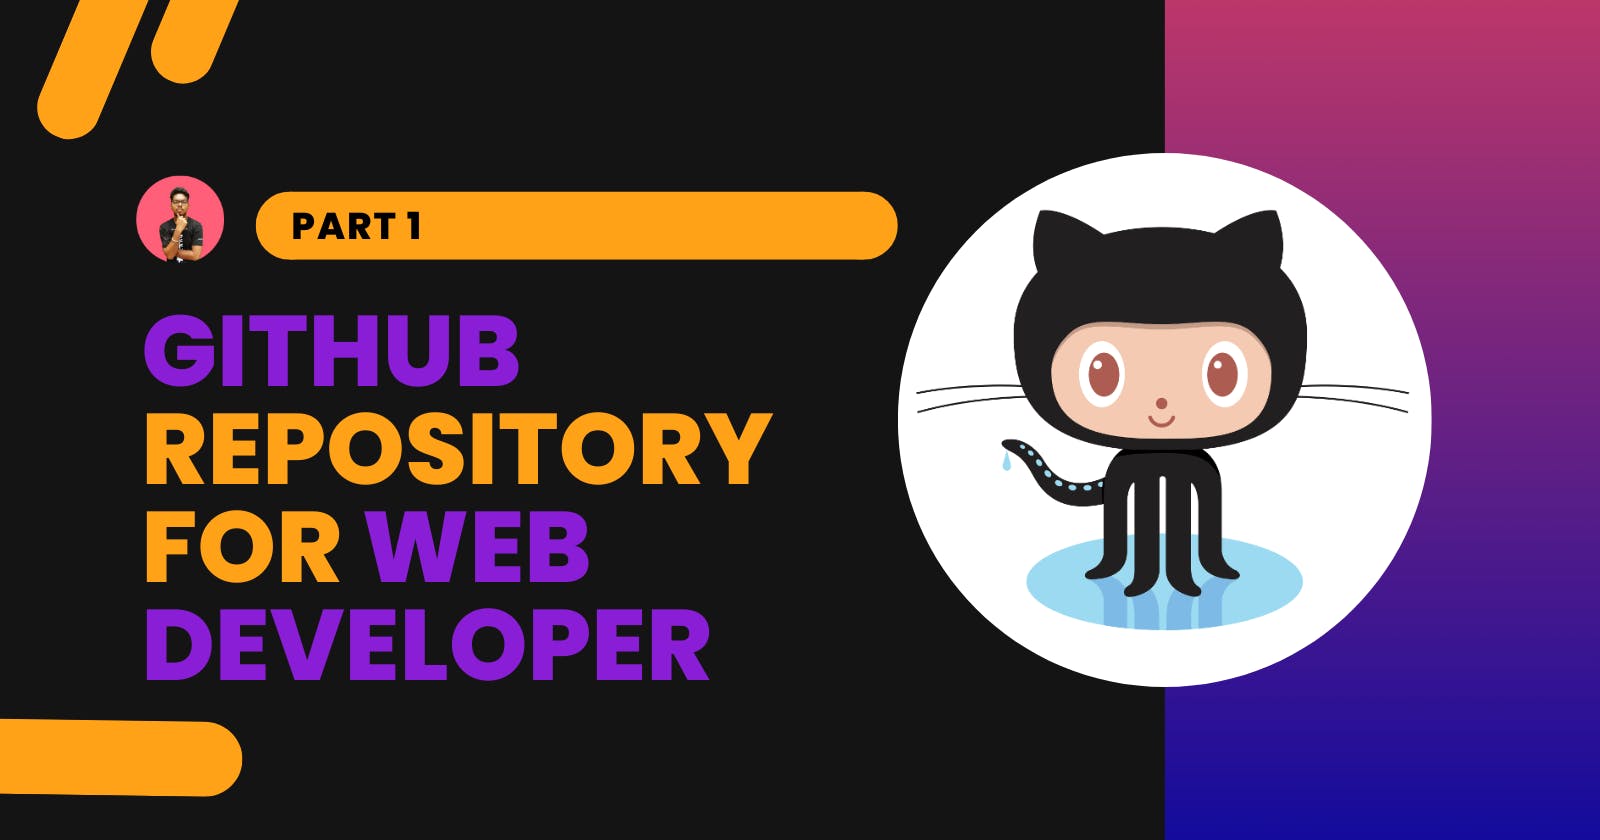 Awesome GitHub Repository for Web Developer - Part 1